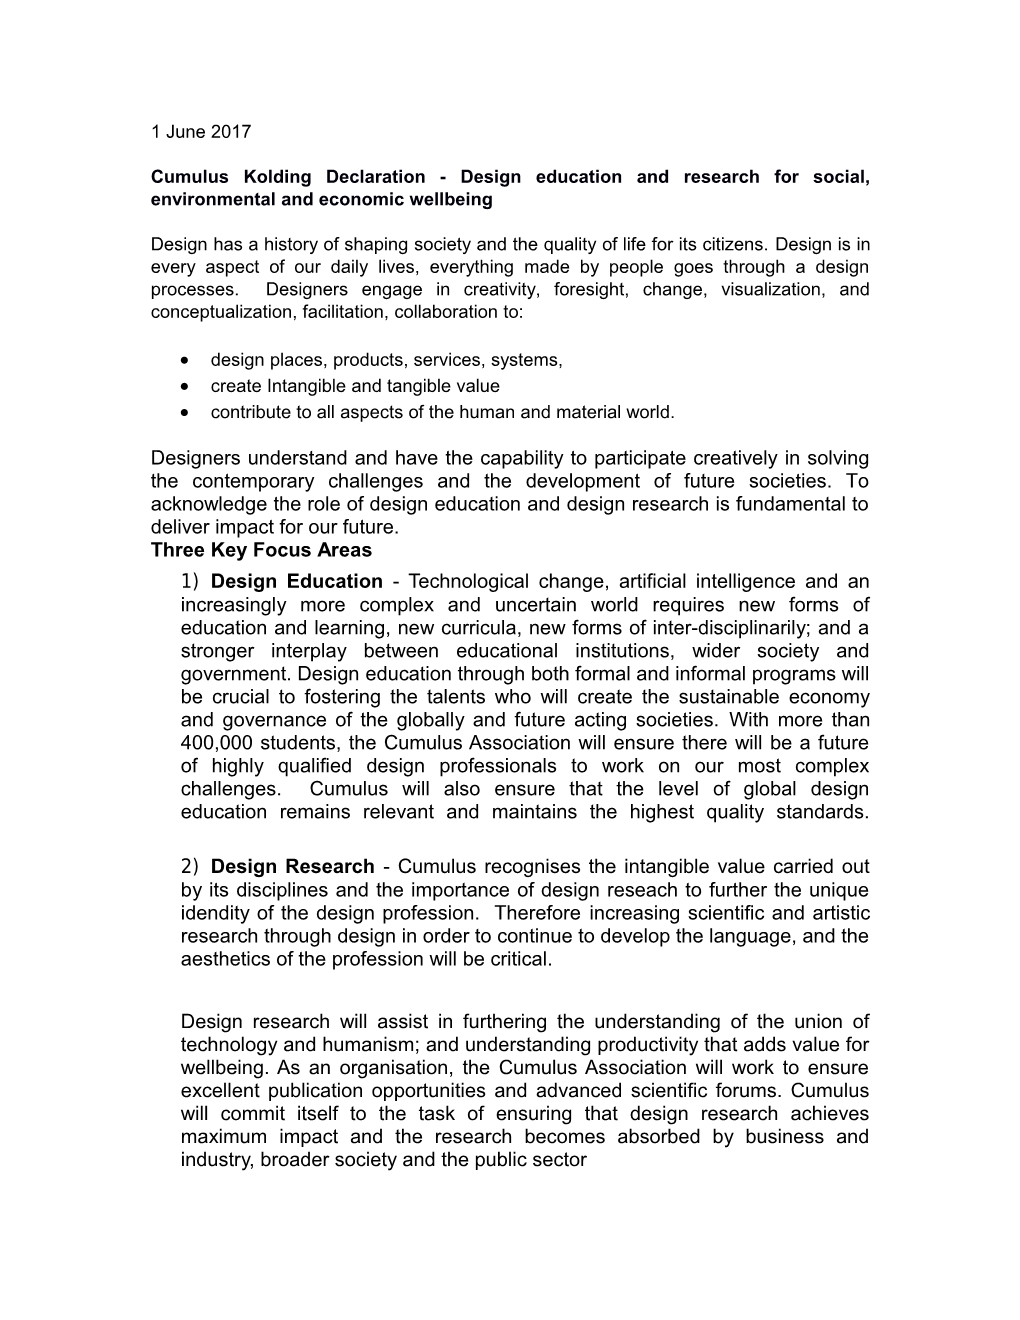 Cumulus Kolding Declaration - Design Education and Research for Social, Environmental